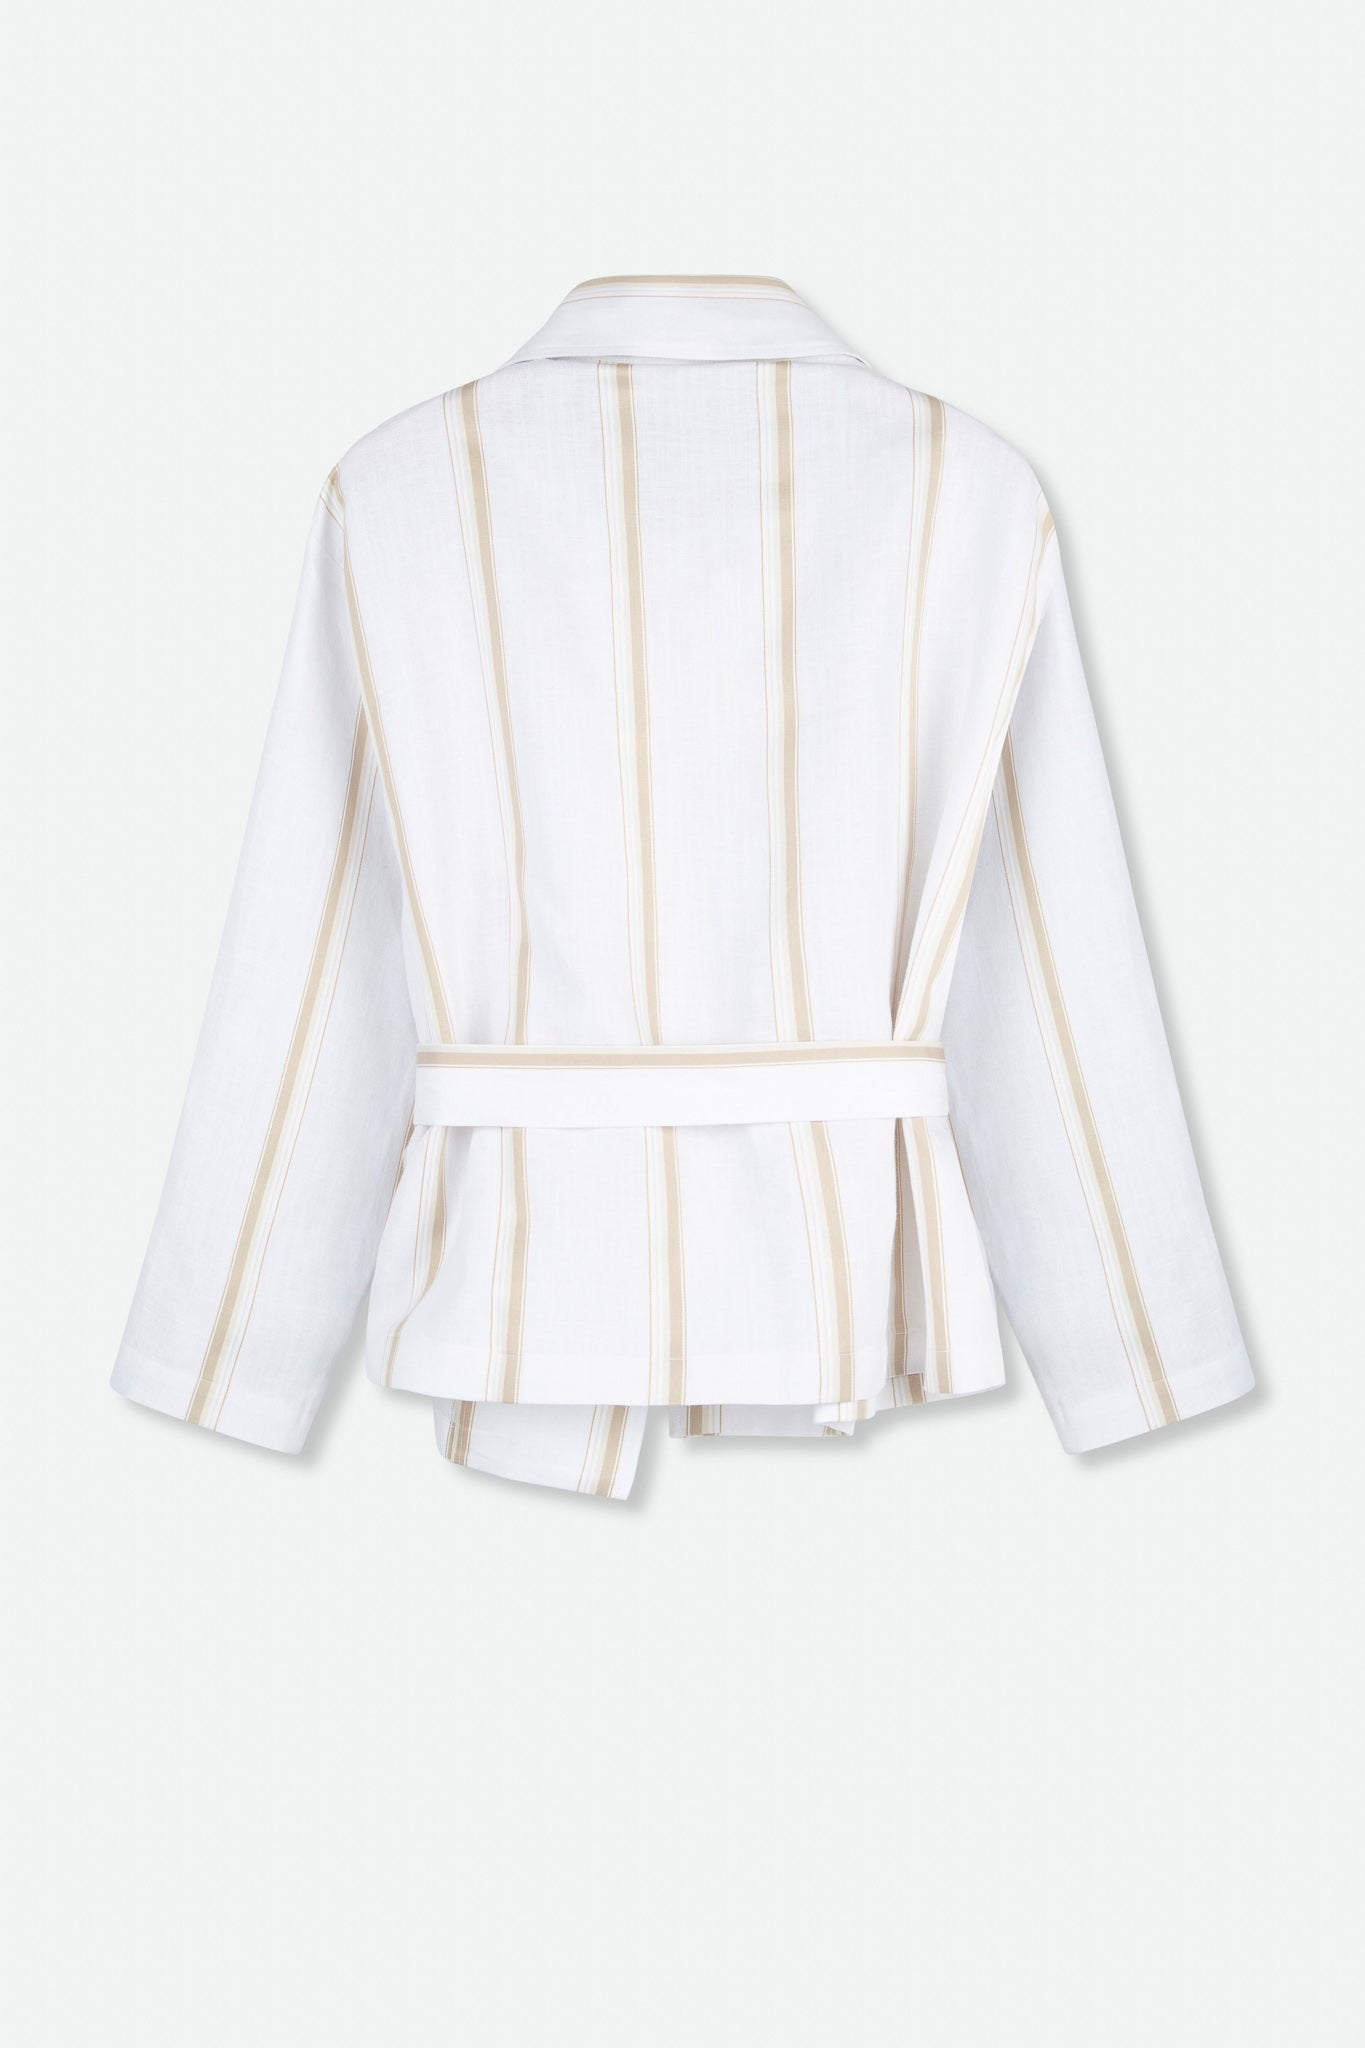 KIMBERLY TIED JACKET IN LINEN-COTTON - Jarbo